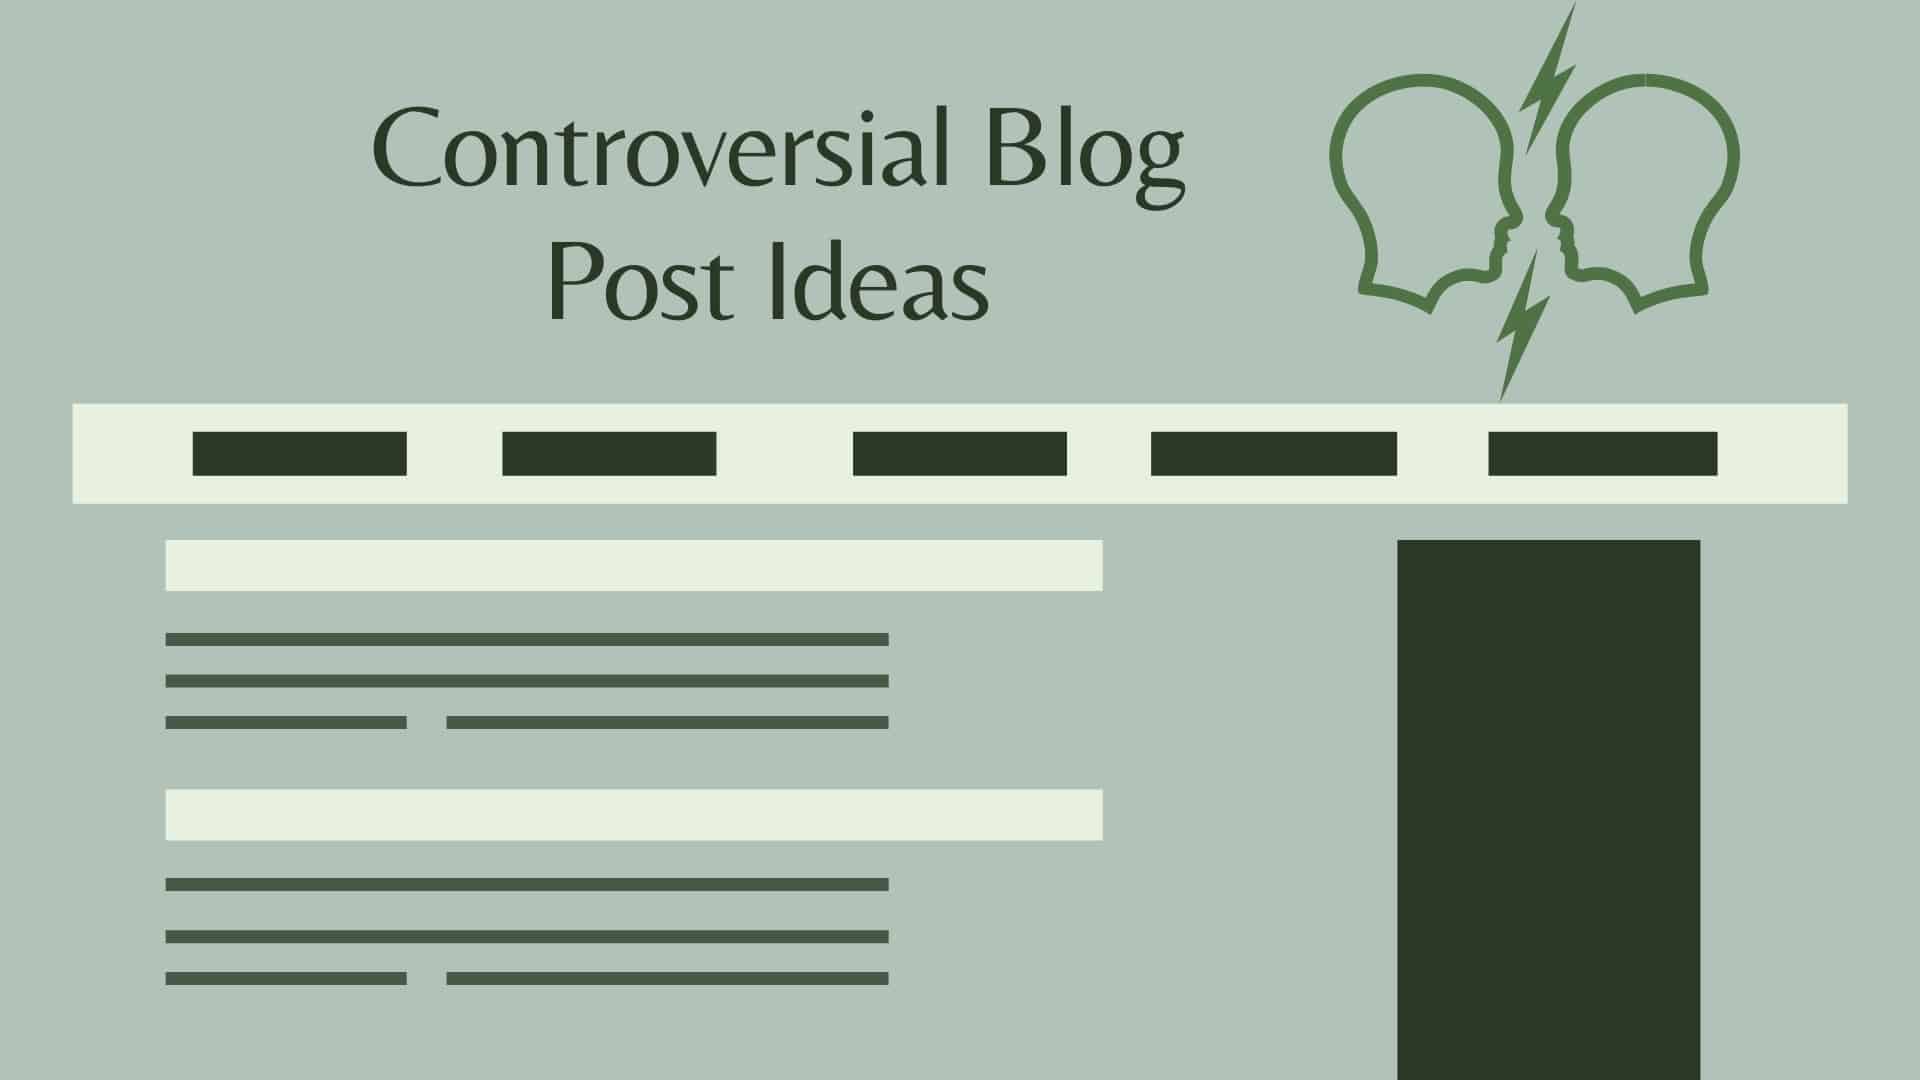 Controversial Blog Post Ideas - Find Blog Topic Ideas that Spark Controversy - Controversial Blog Post Ideas to Write About